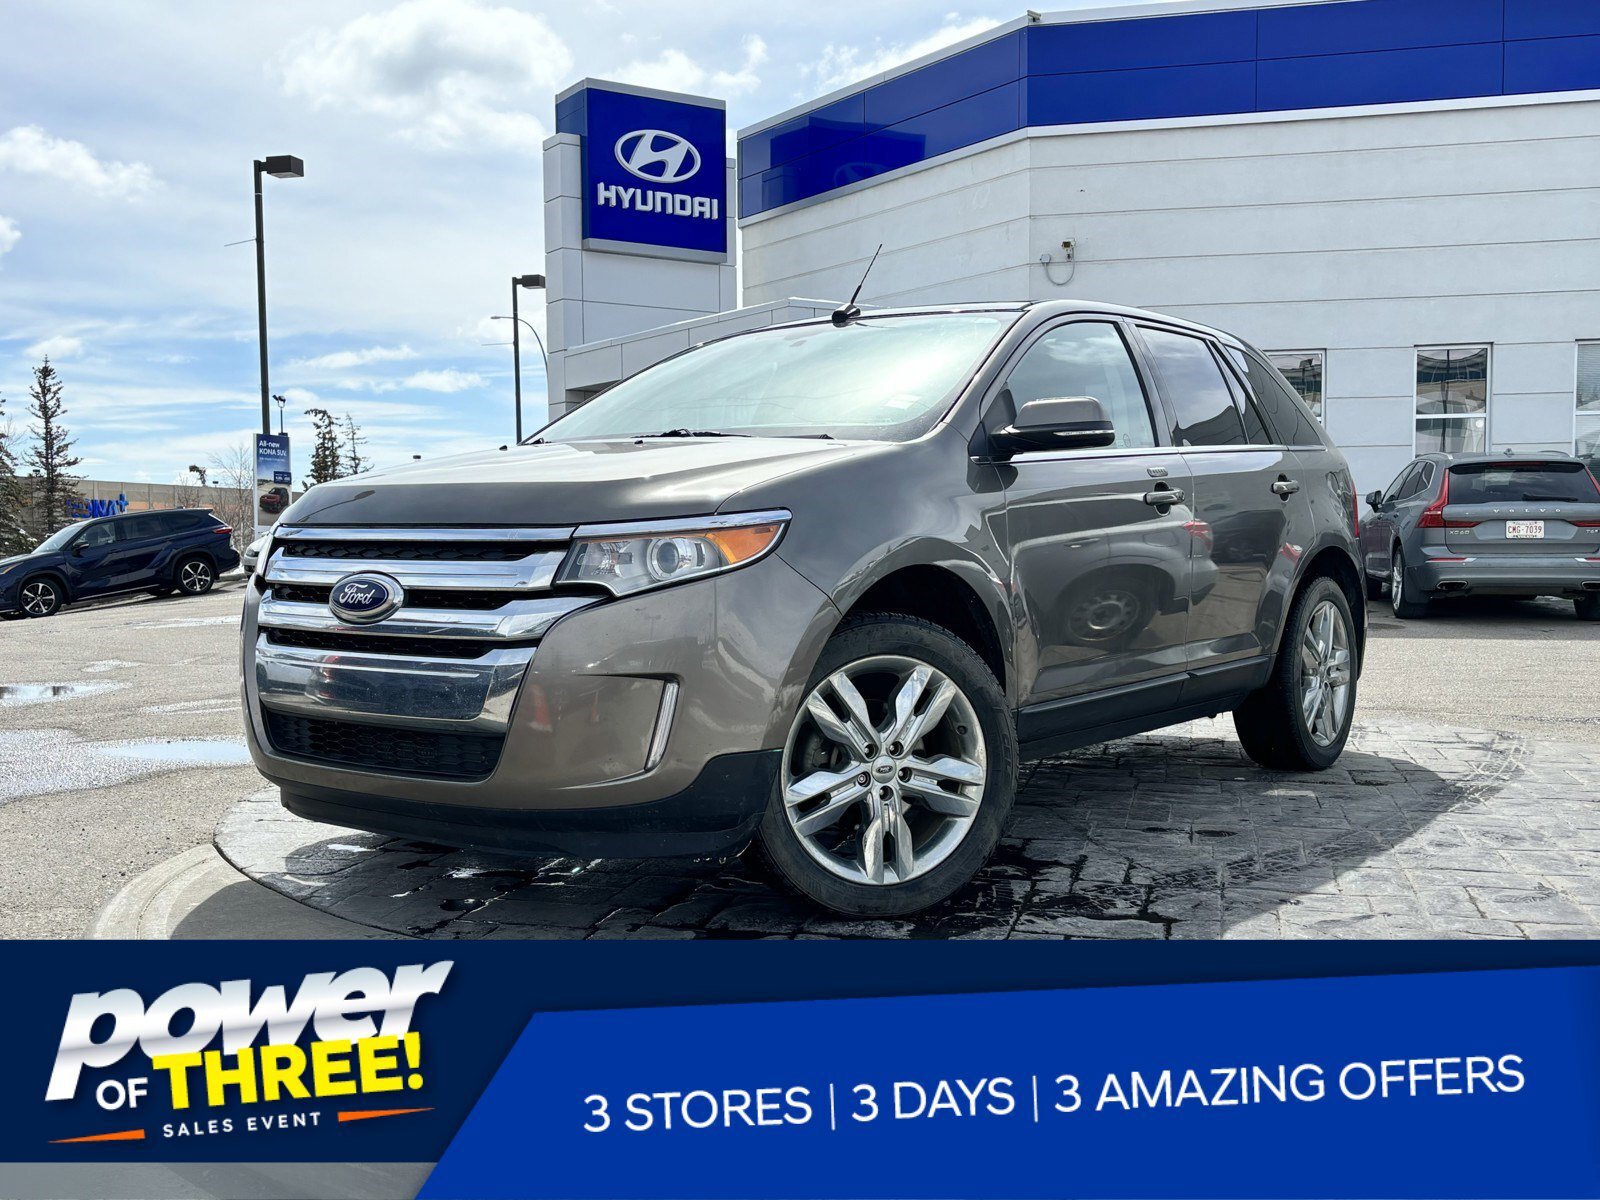 2014 Ford Edge Limited - 4WD, No Accidents, One Owner, Parking Se